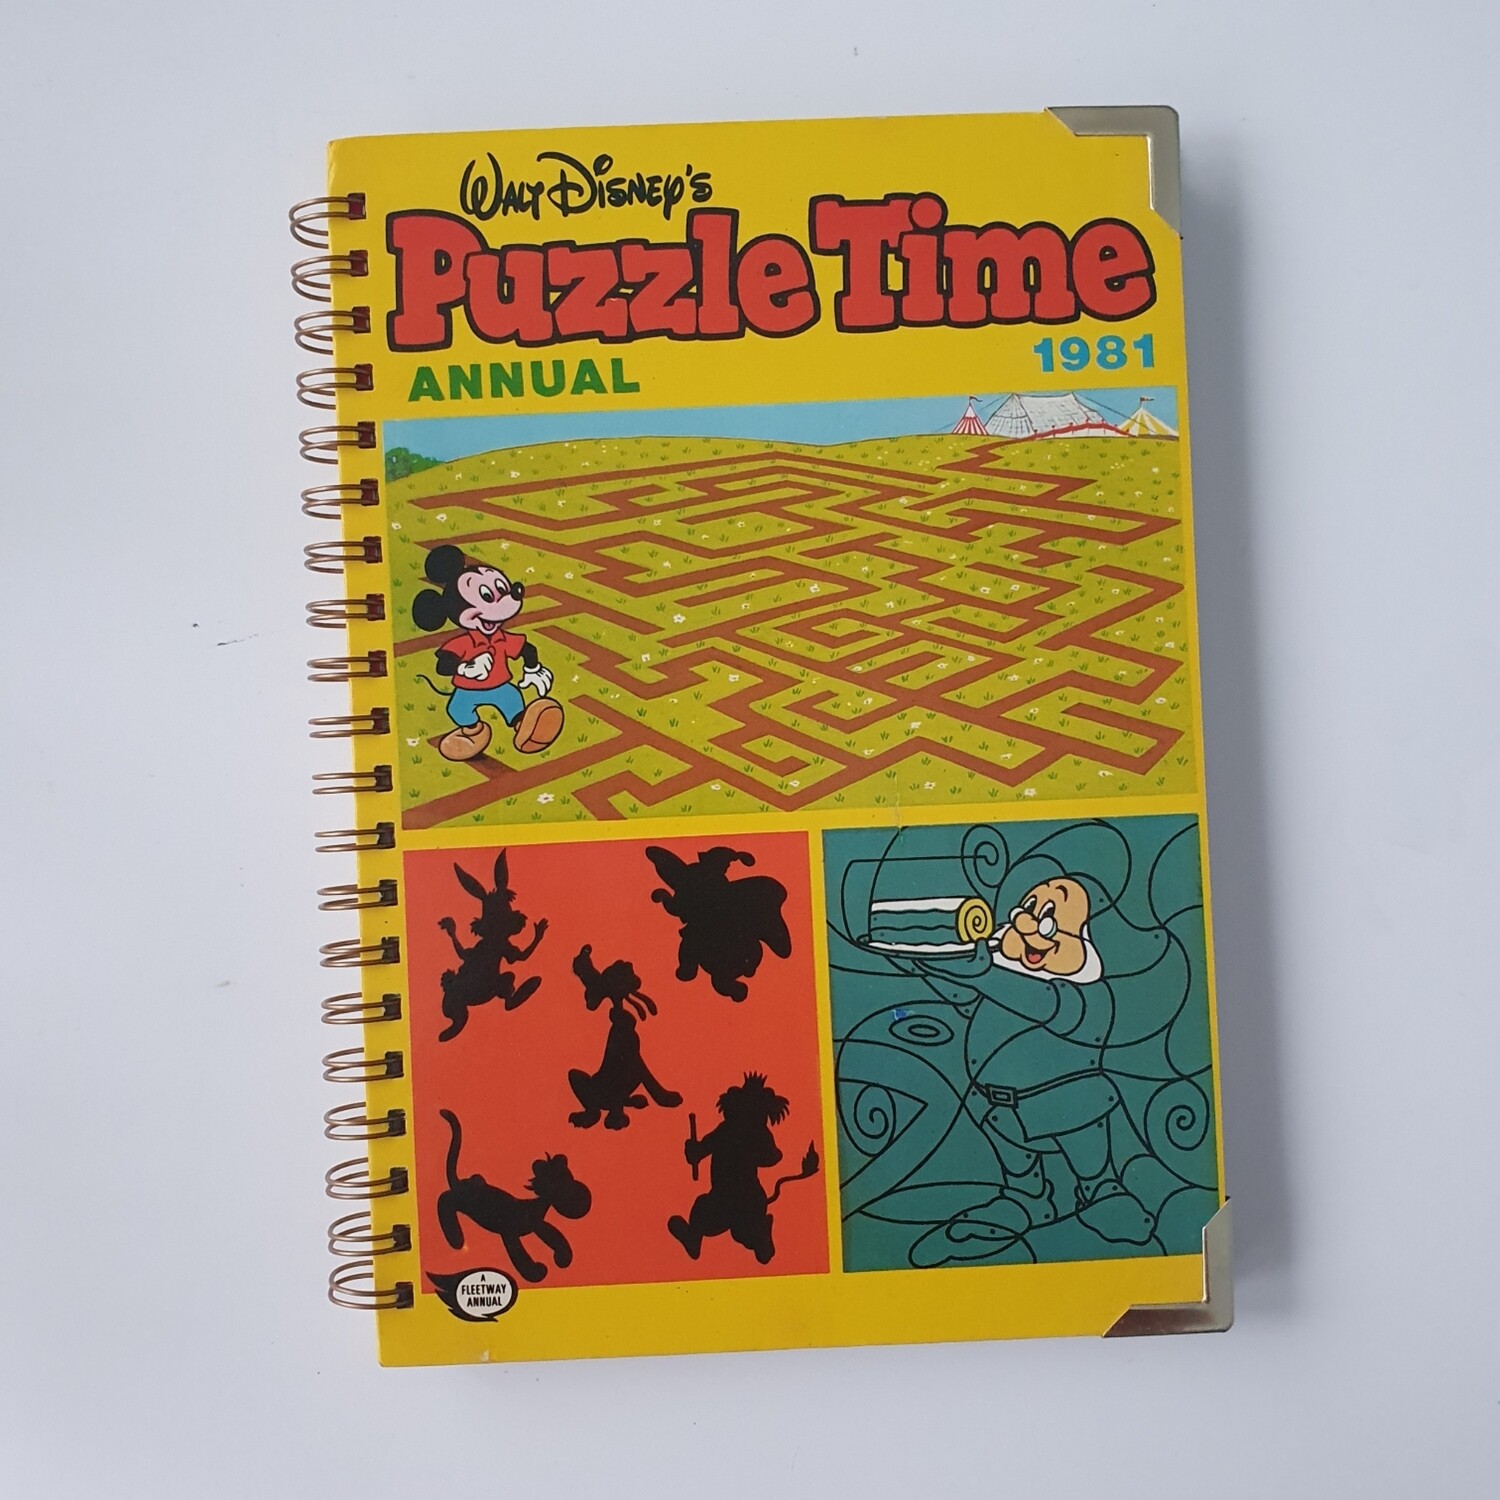 Walt Disney's Puzzle Time 1981 Annual plain paper notebook - READY TO SHIP, comes with metal book corners